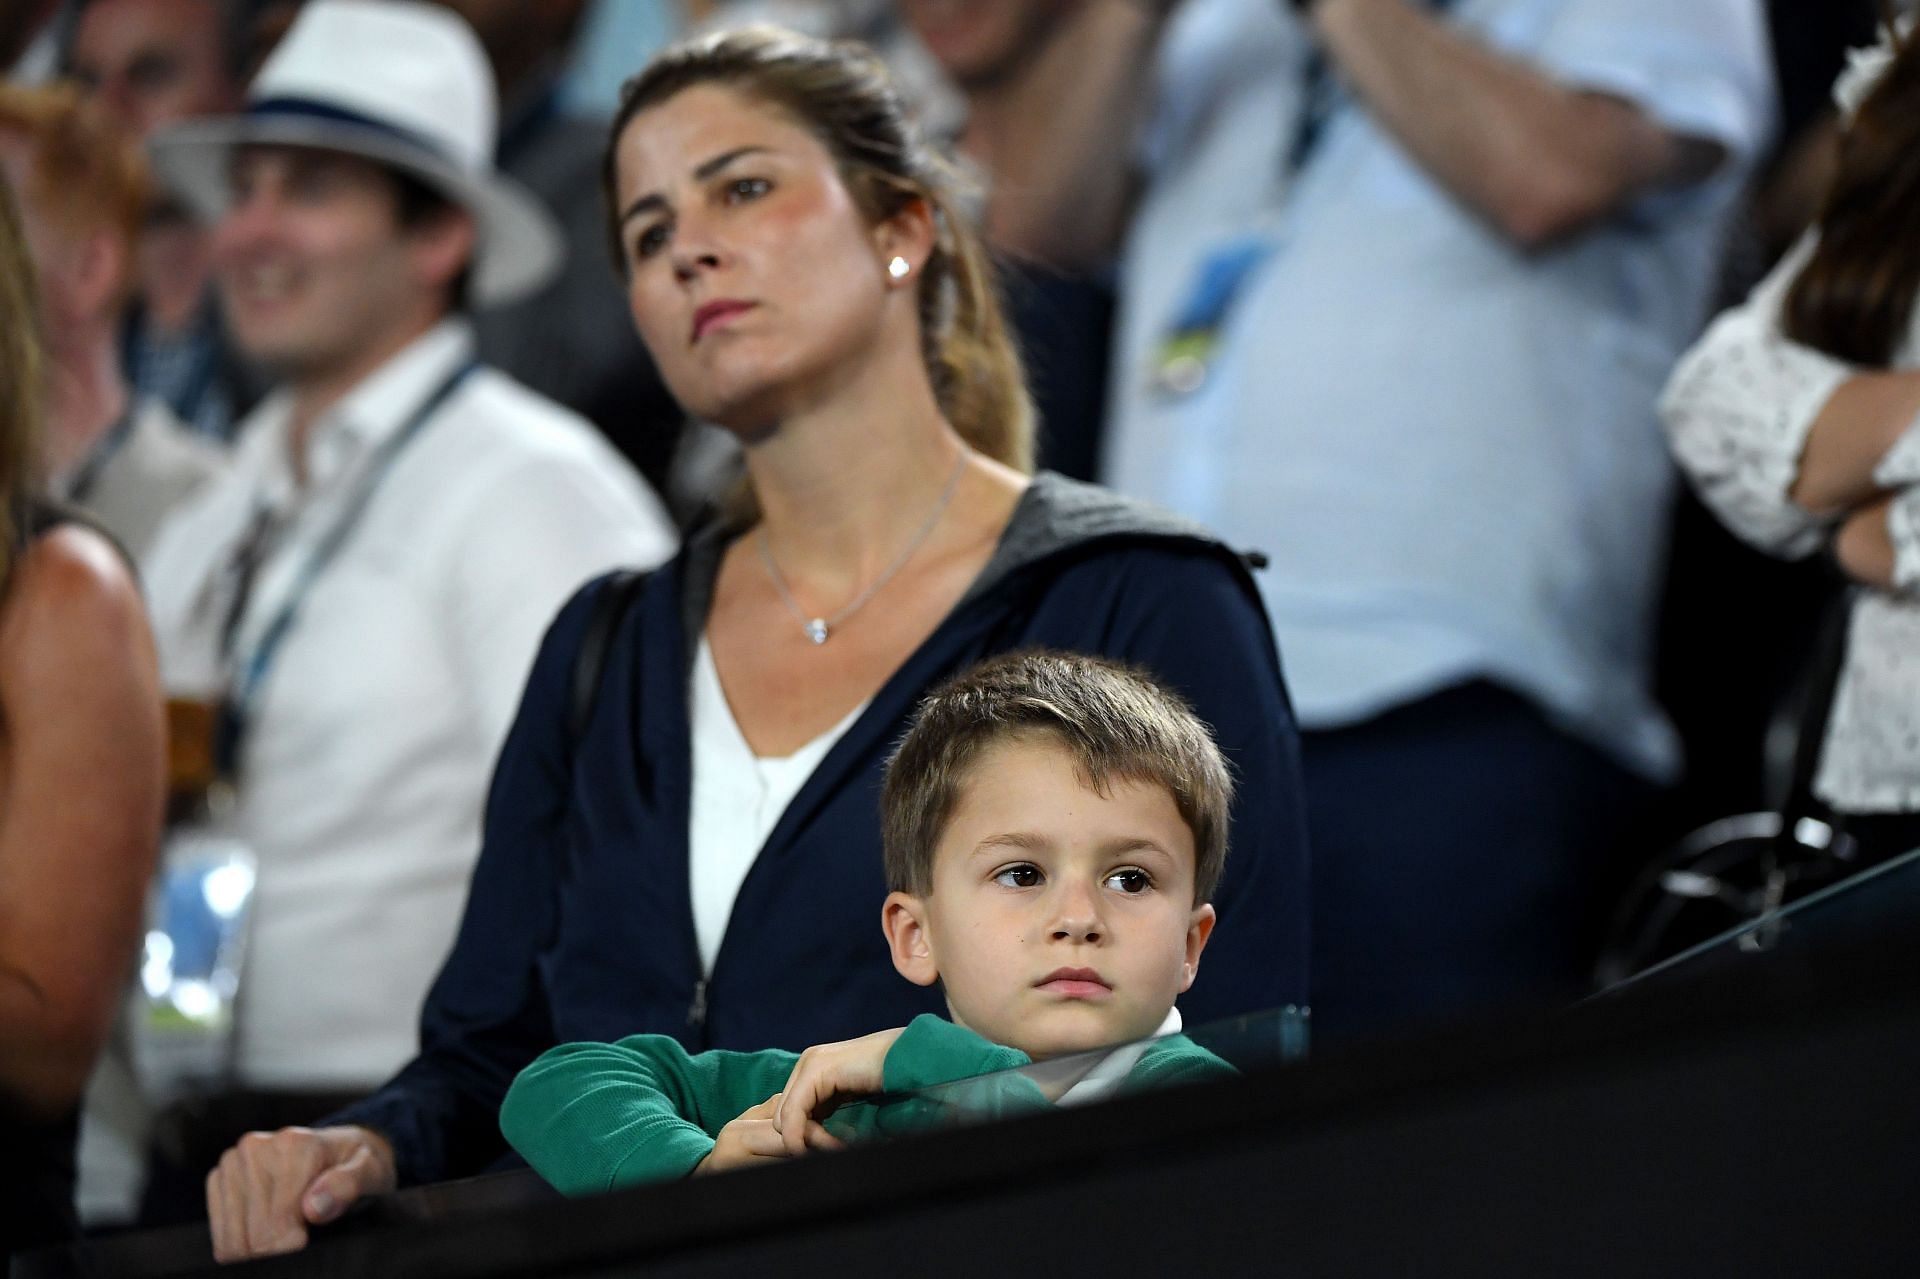 Mirka Federer with son at the Australian Open